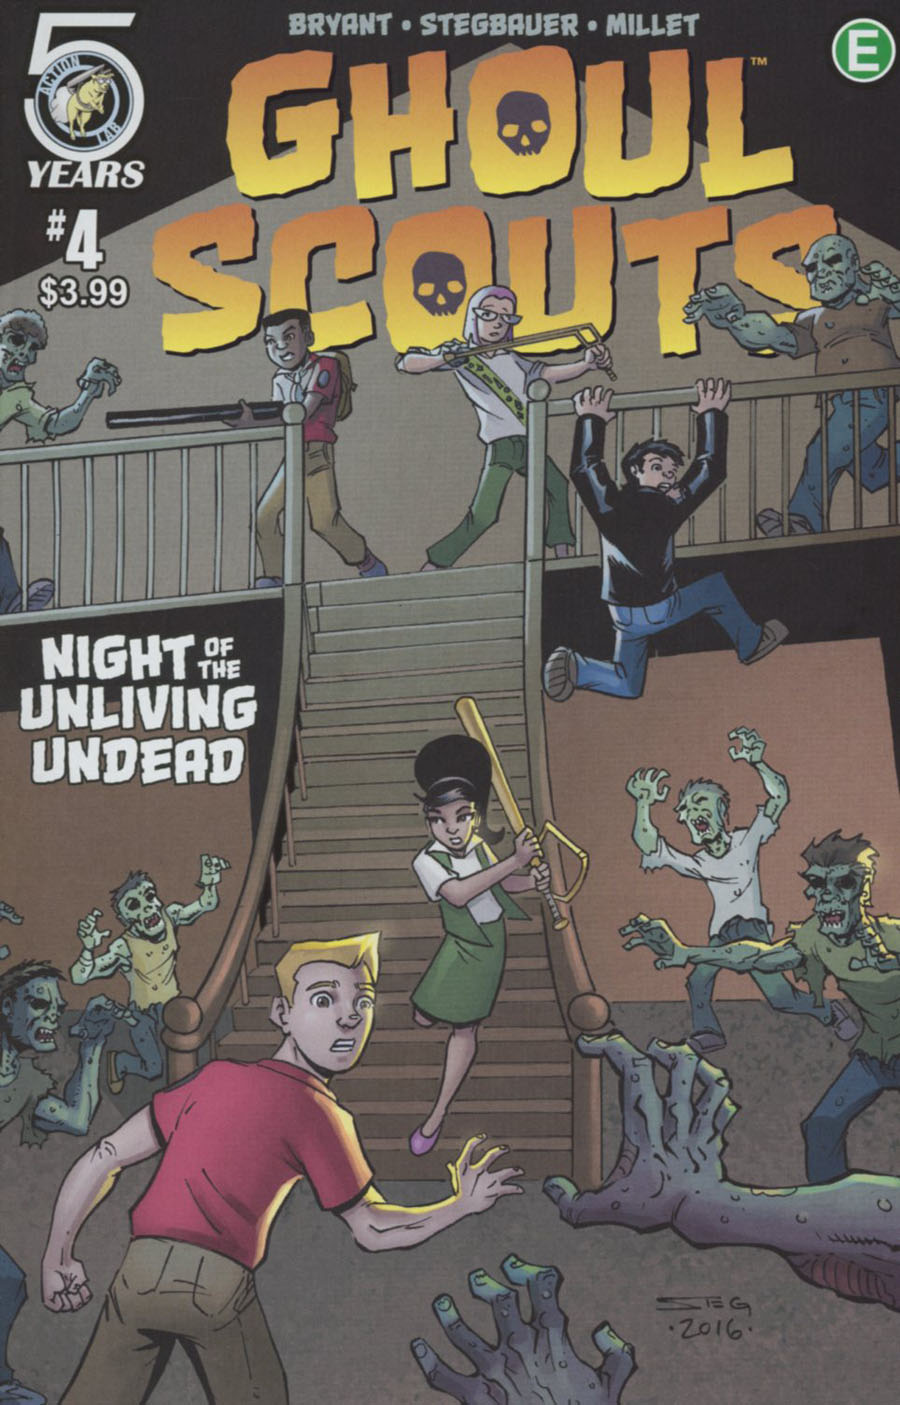 Ghoul Scouts Night Of The Unliving Undead #4 Cover A Regular Mark Stegbauer Cover